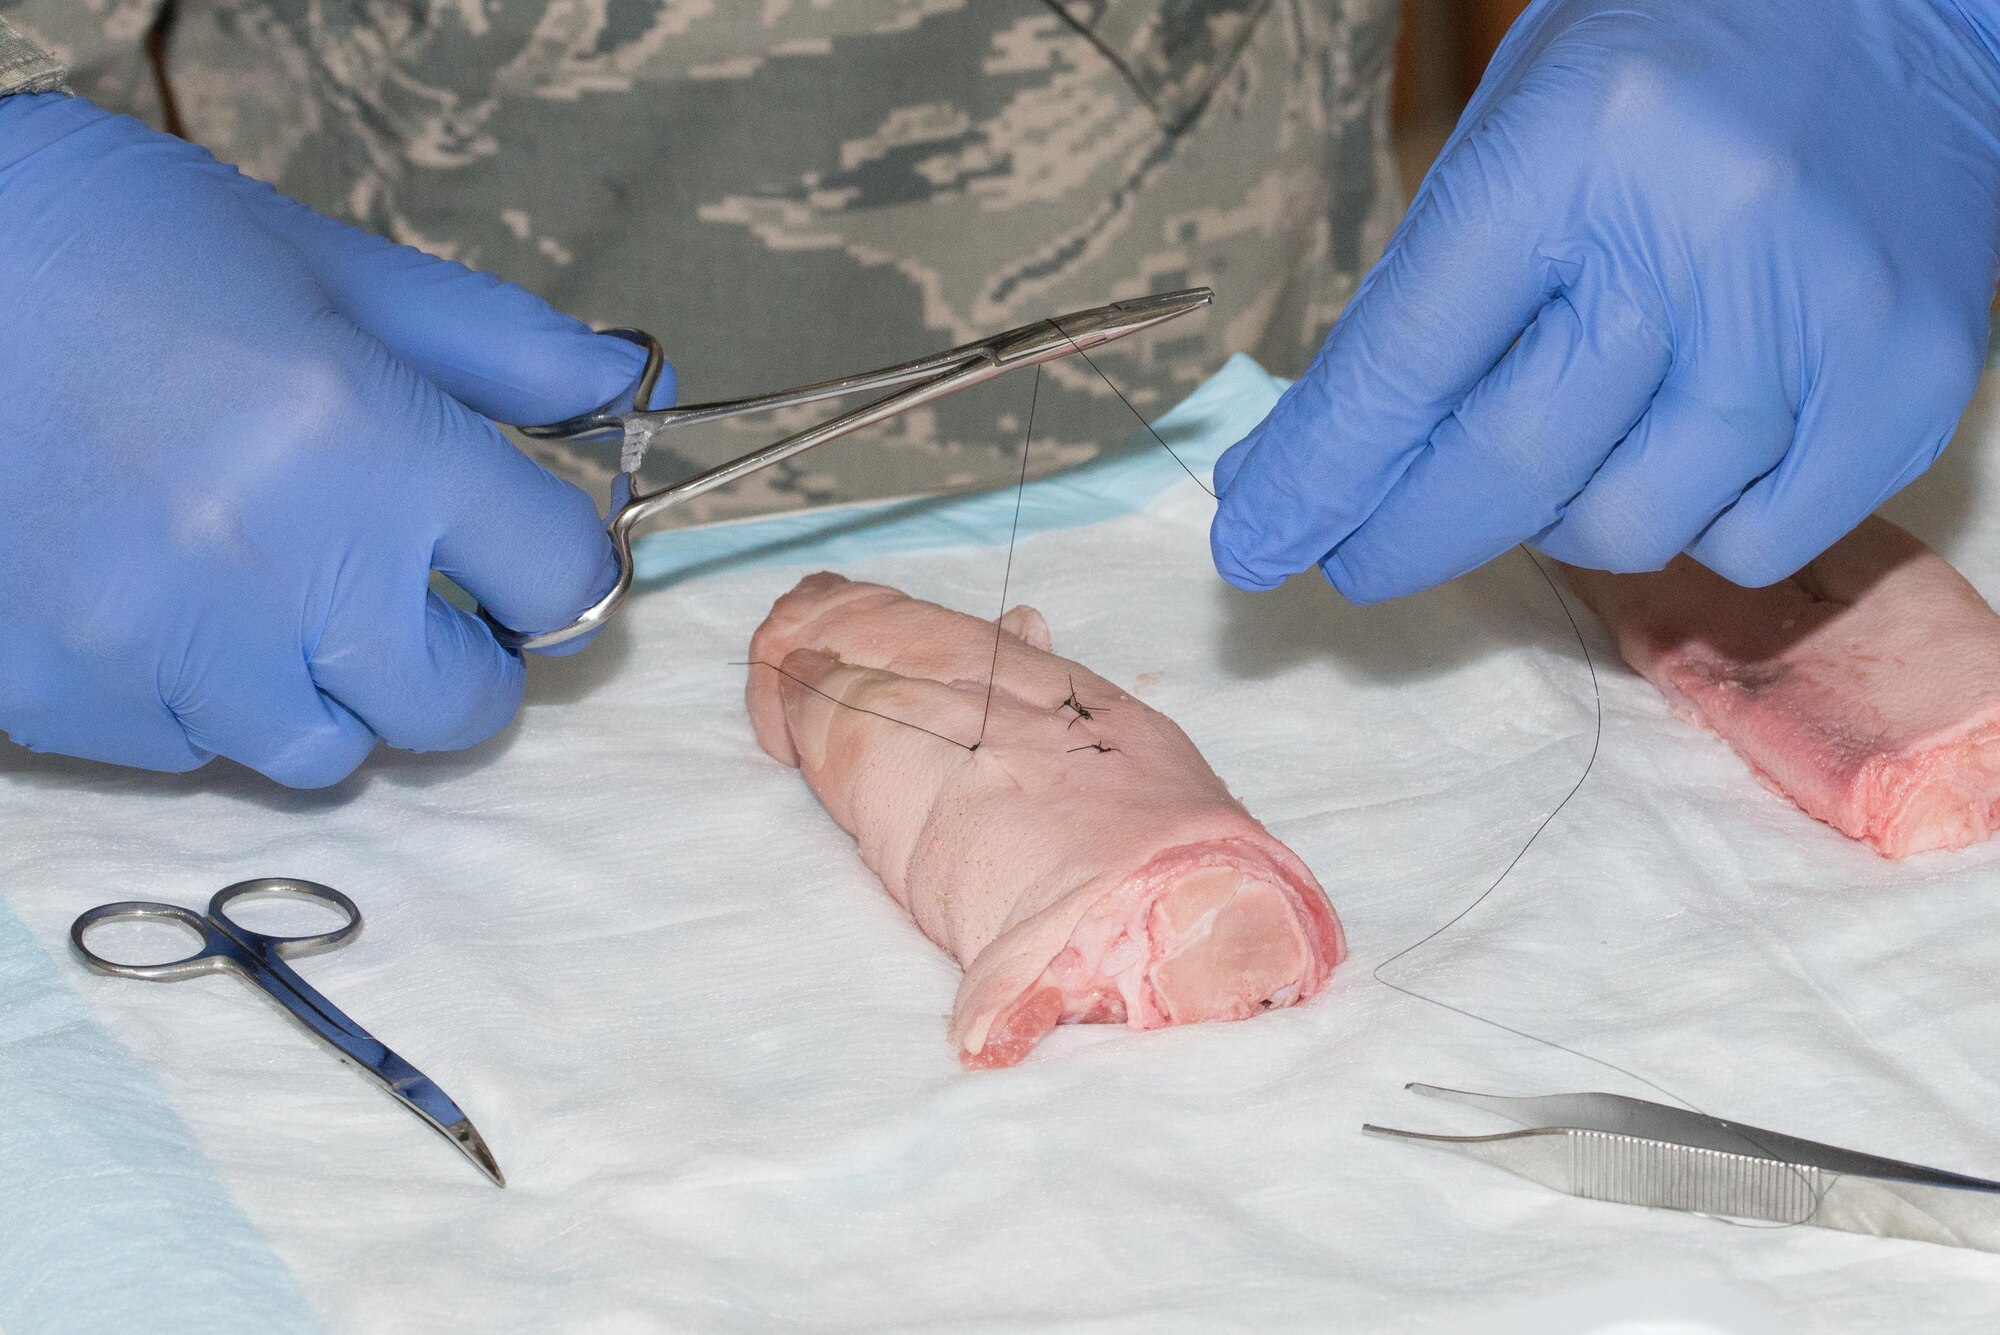 A U.S. Airman practices suturing  during a 36th Medical Group training day June 8, 2017, at Andersen Air Force Base, Guam. To maintain proficiency, the 36th and the 159th MDG, Naval Air Station Joint Reserve Base New Orleans, La., trained readiness skills that are not often practiced in a clinical setting. (U.S. Air Force photo by Airman 1st Class Jacob Skovo)